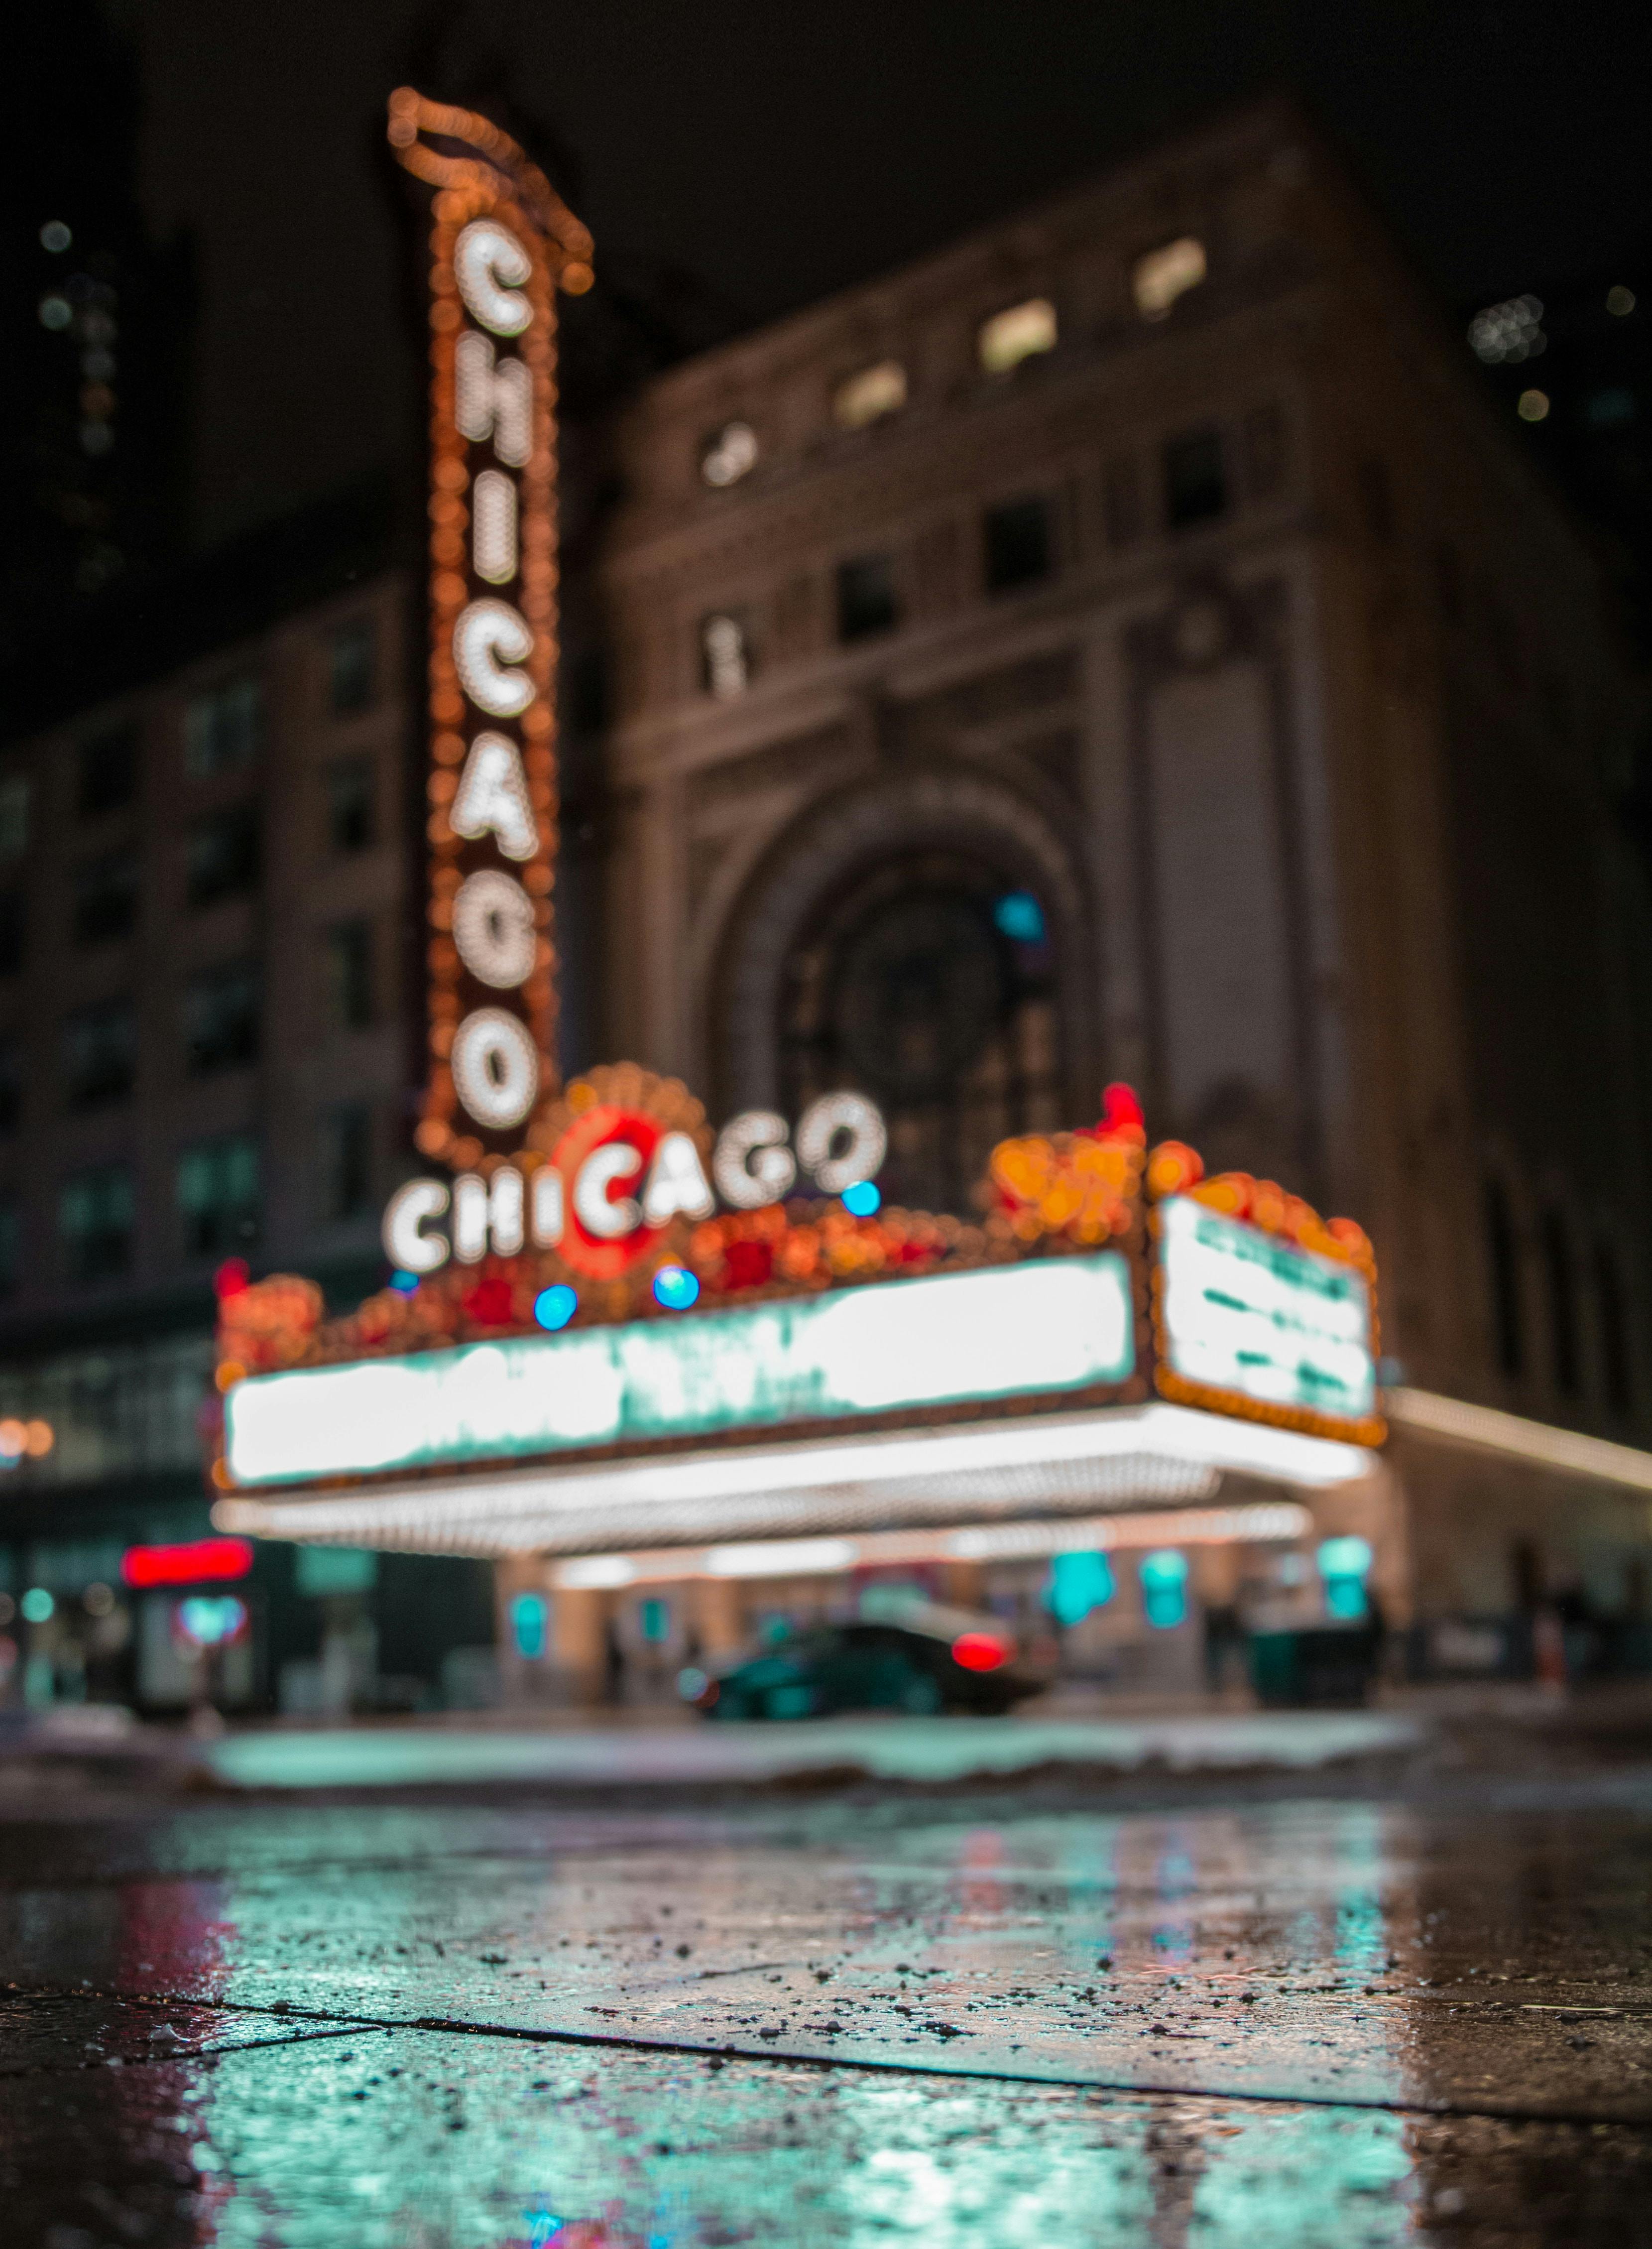 chicago 4d theater